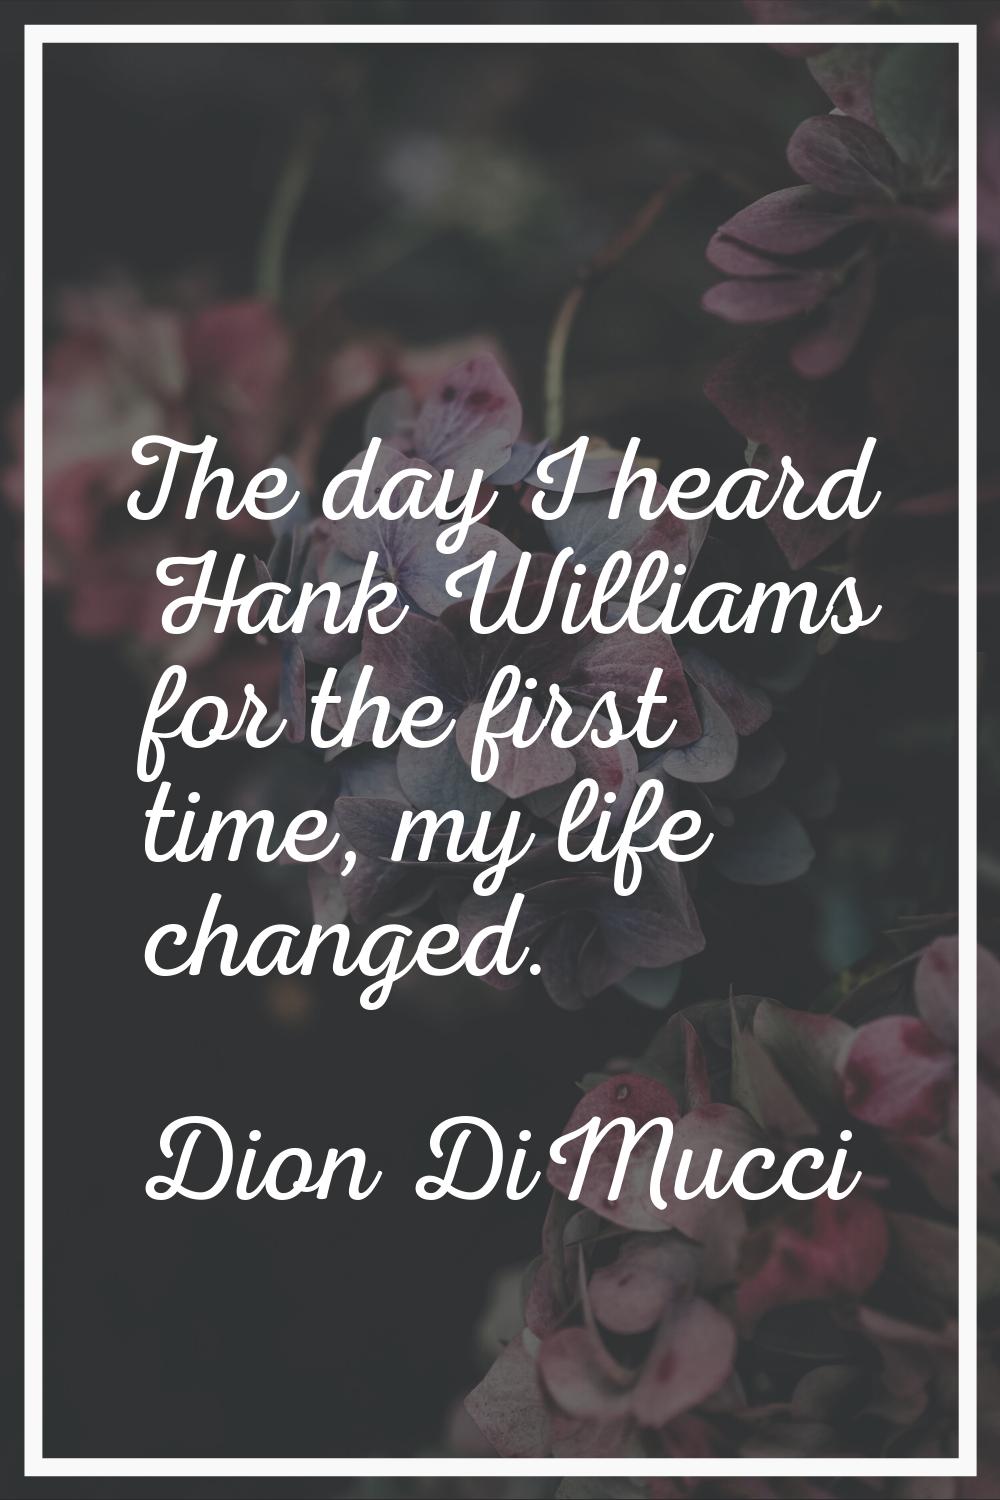 The day I heard Hank Williams for the first time, my life changed.